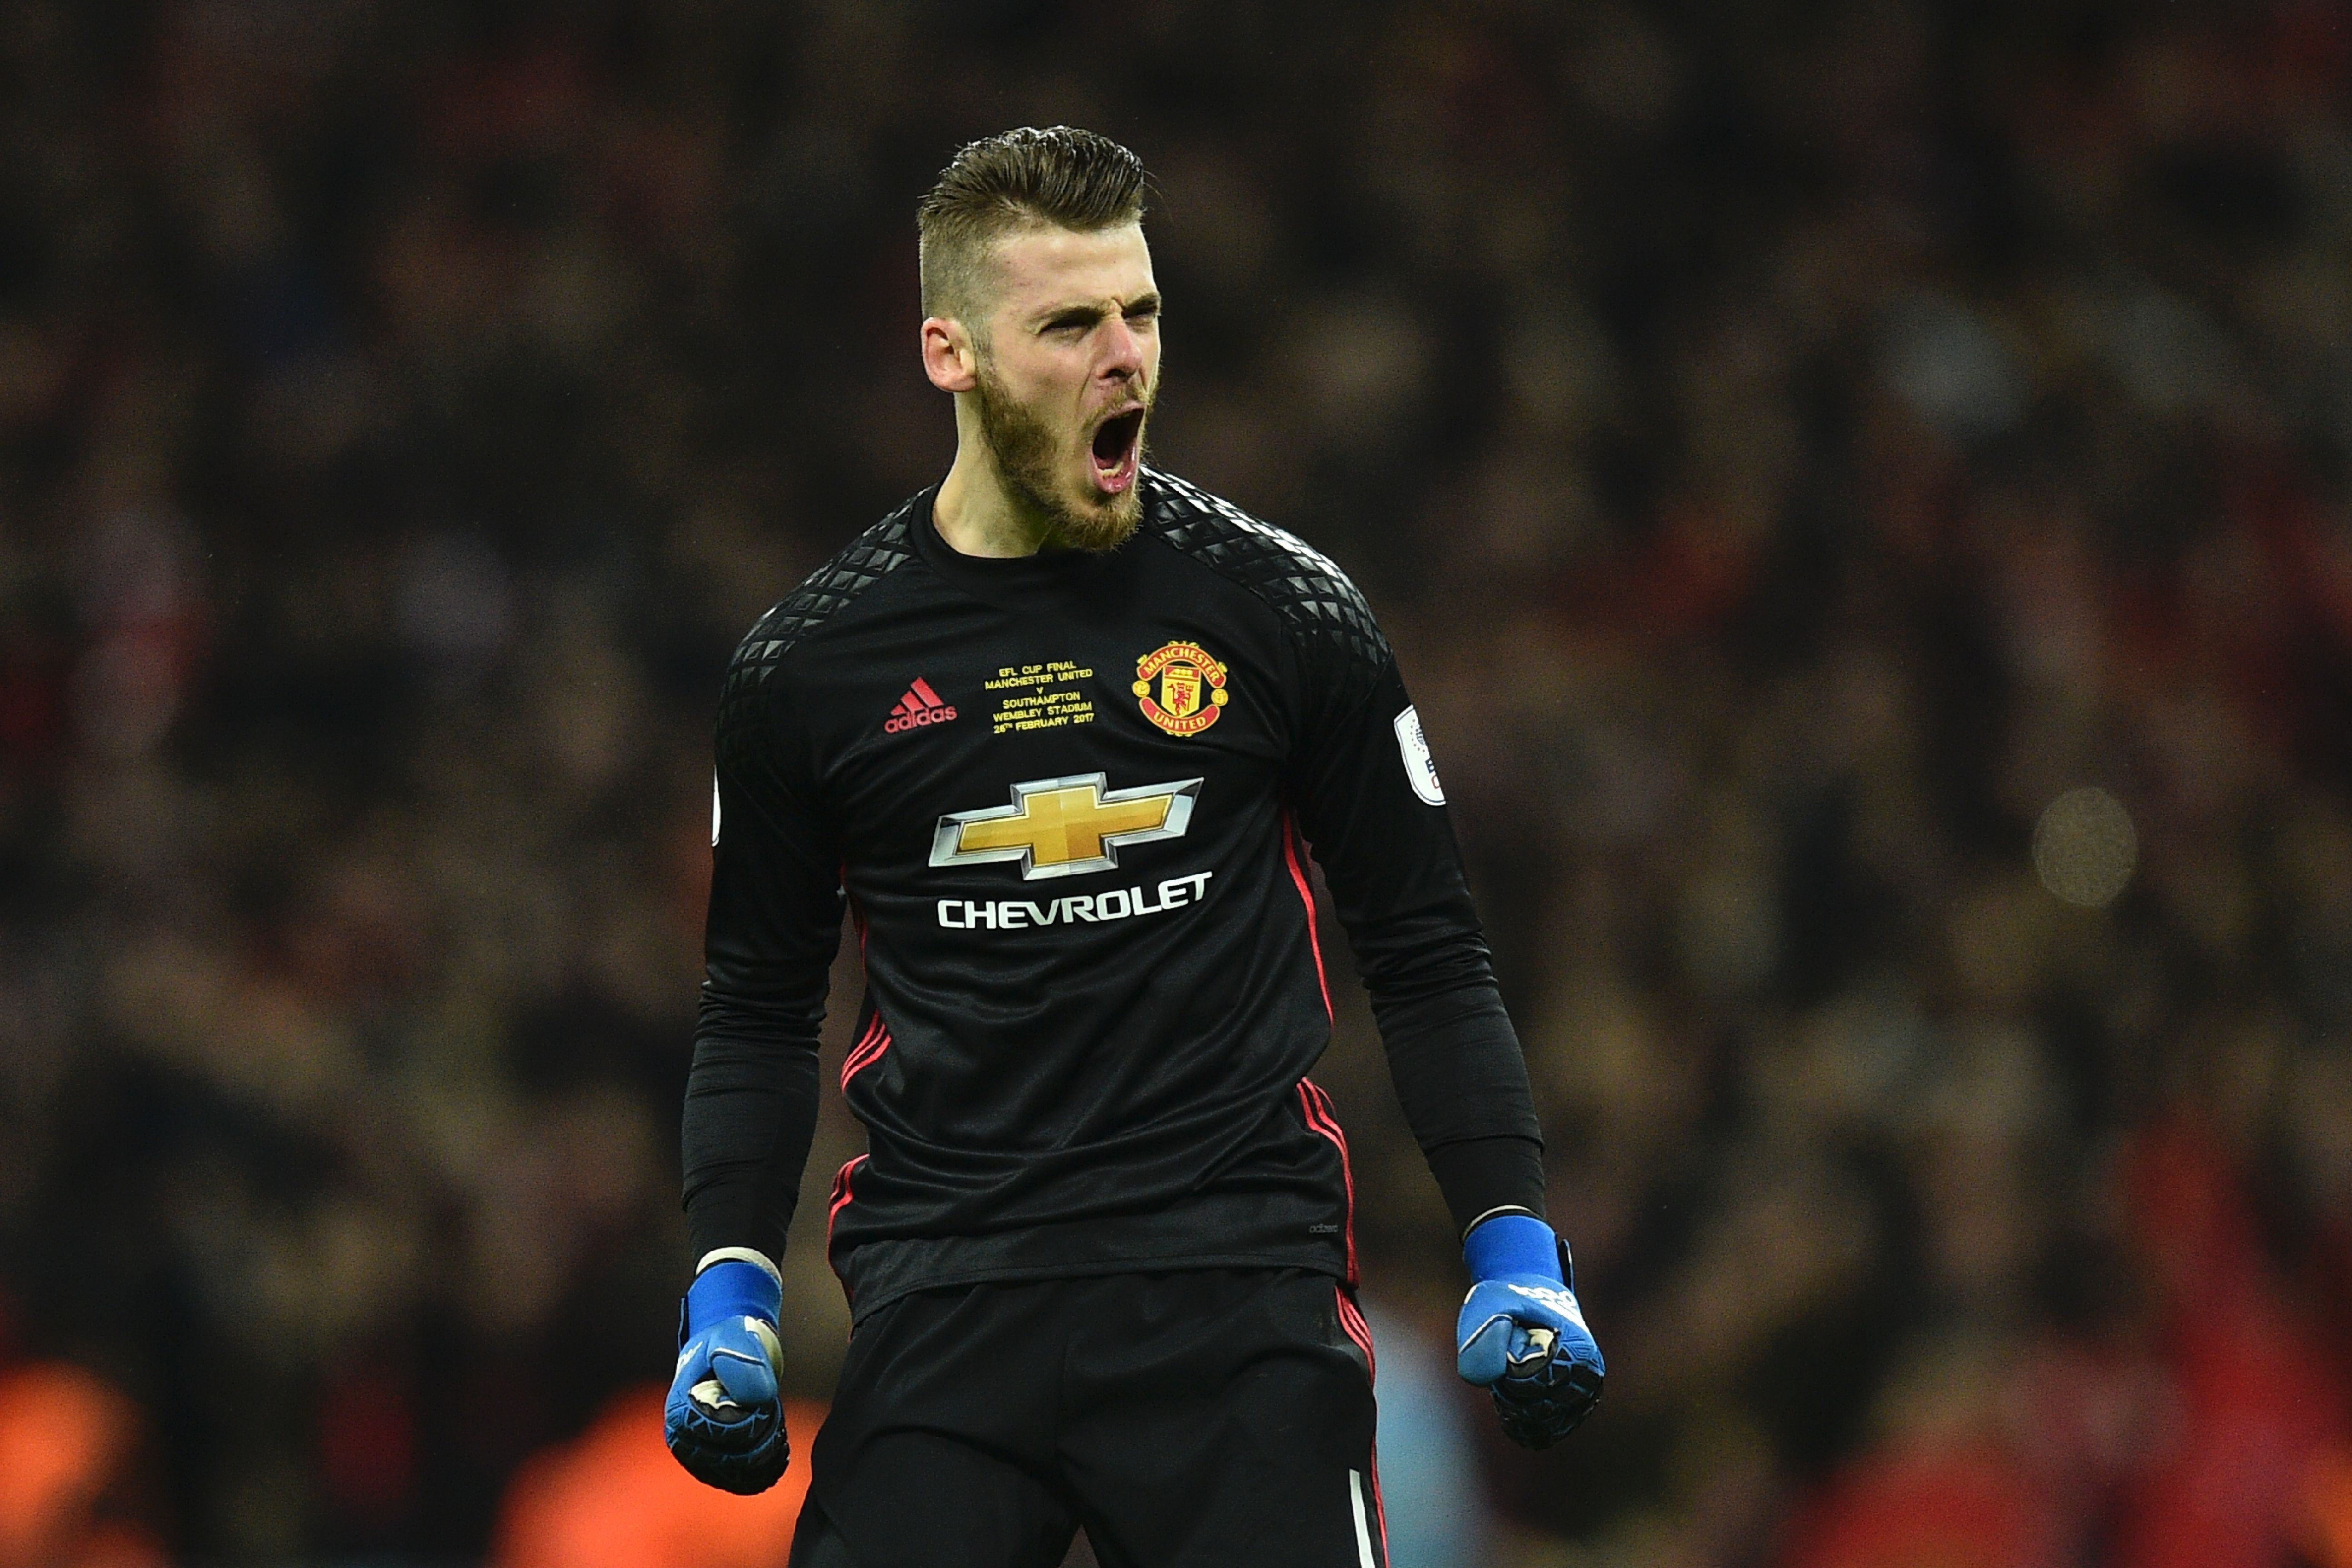 Manchester United's Spanish goalkeeper David de Gea celebrates at the final whistle in the English League Cup final football match between Manchester United and Southampton at Wembley stadium in north London on February 26, 2017.
Manchester United won the game 3-2. / AFP / Glyn KIRK / RESTRICTED TO EDITORIAL USE. No use with unauthorized audio, video, data, fixture lists, club/league logos or 'live' services. Online in-match use limited to 75 images, no video emulation. No use in betting, games or single club/league/player publications.  /         (Photo credit should read GLYN KIRK/AFP/Getty Images)